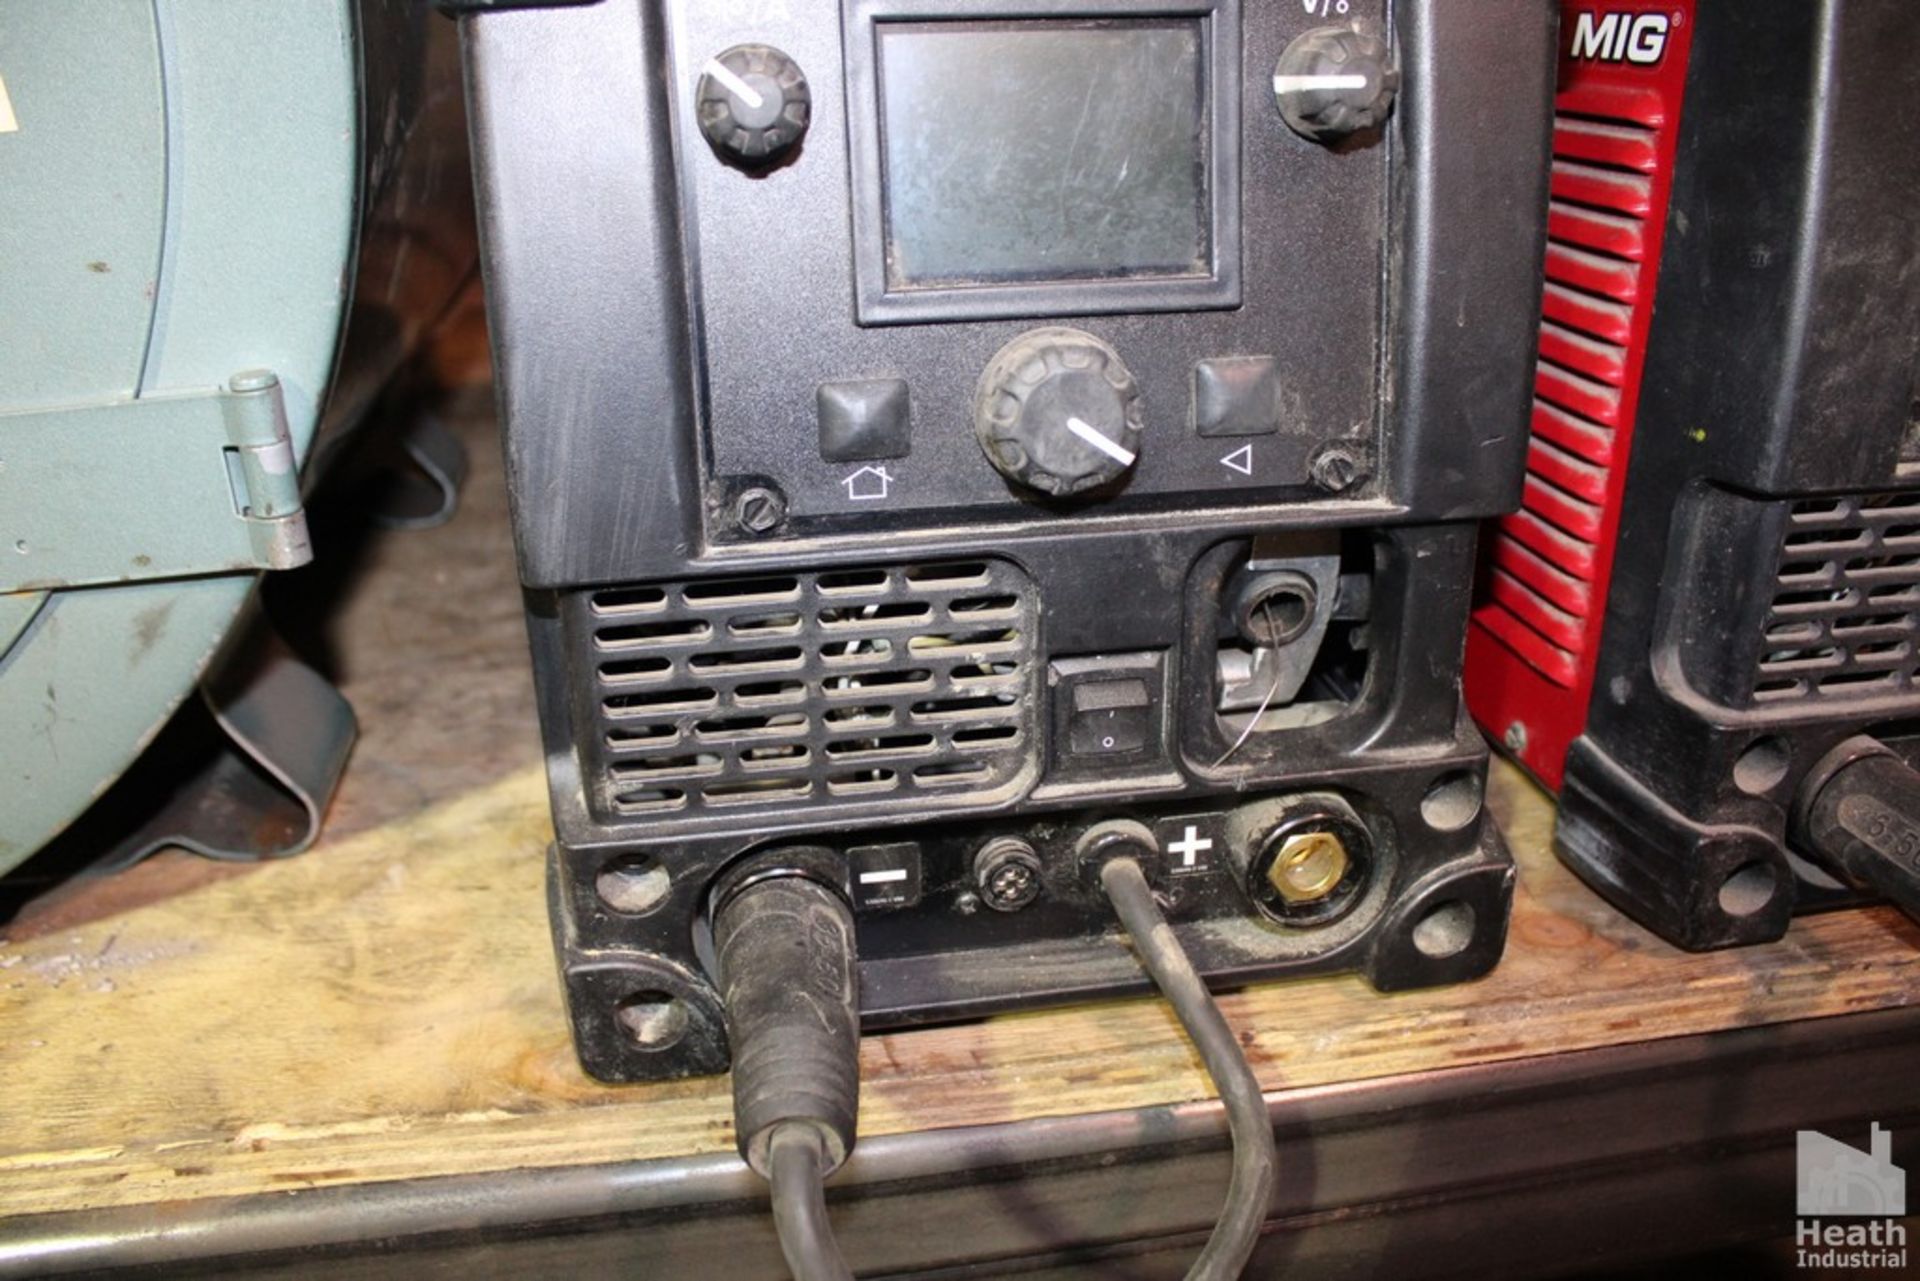 LINCOLN ELECTRIC POWER MIG 210 MP WIRE FEED WELDER - Image 3 of 3